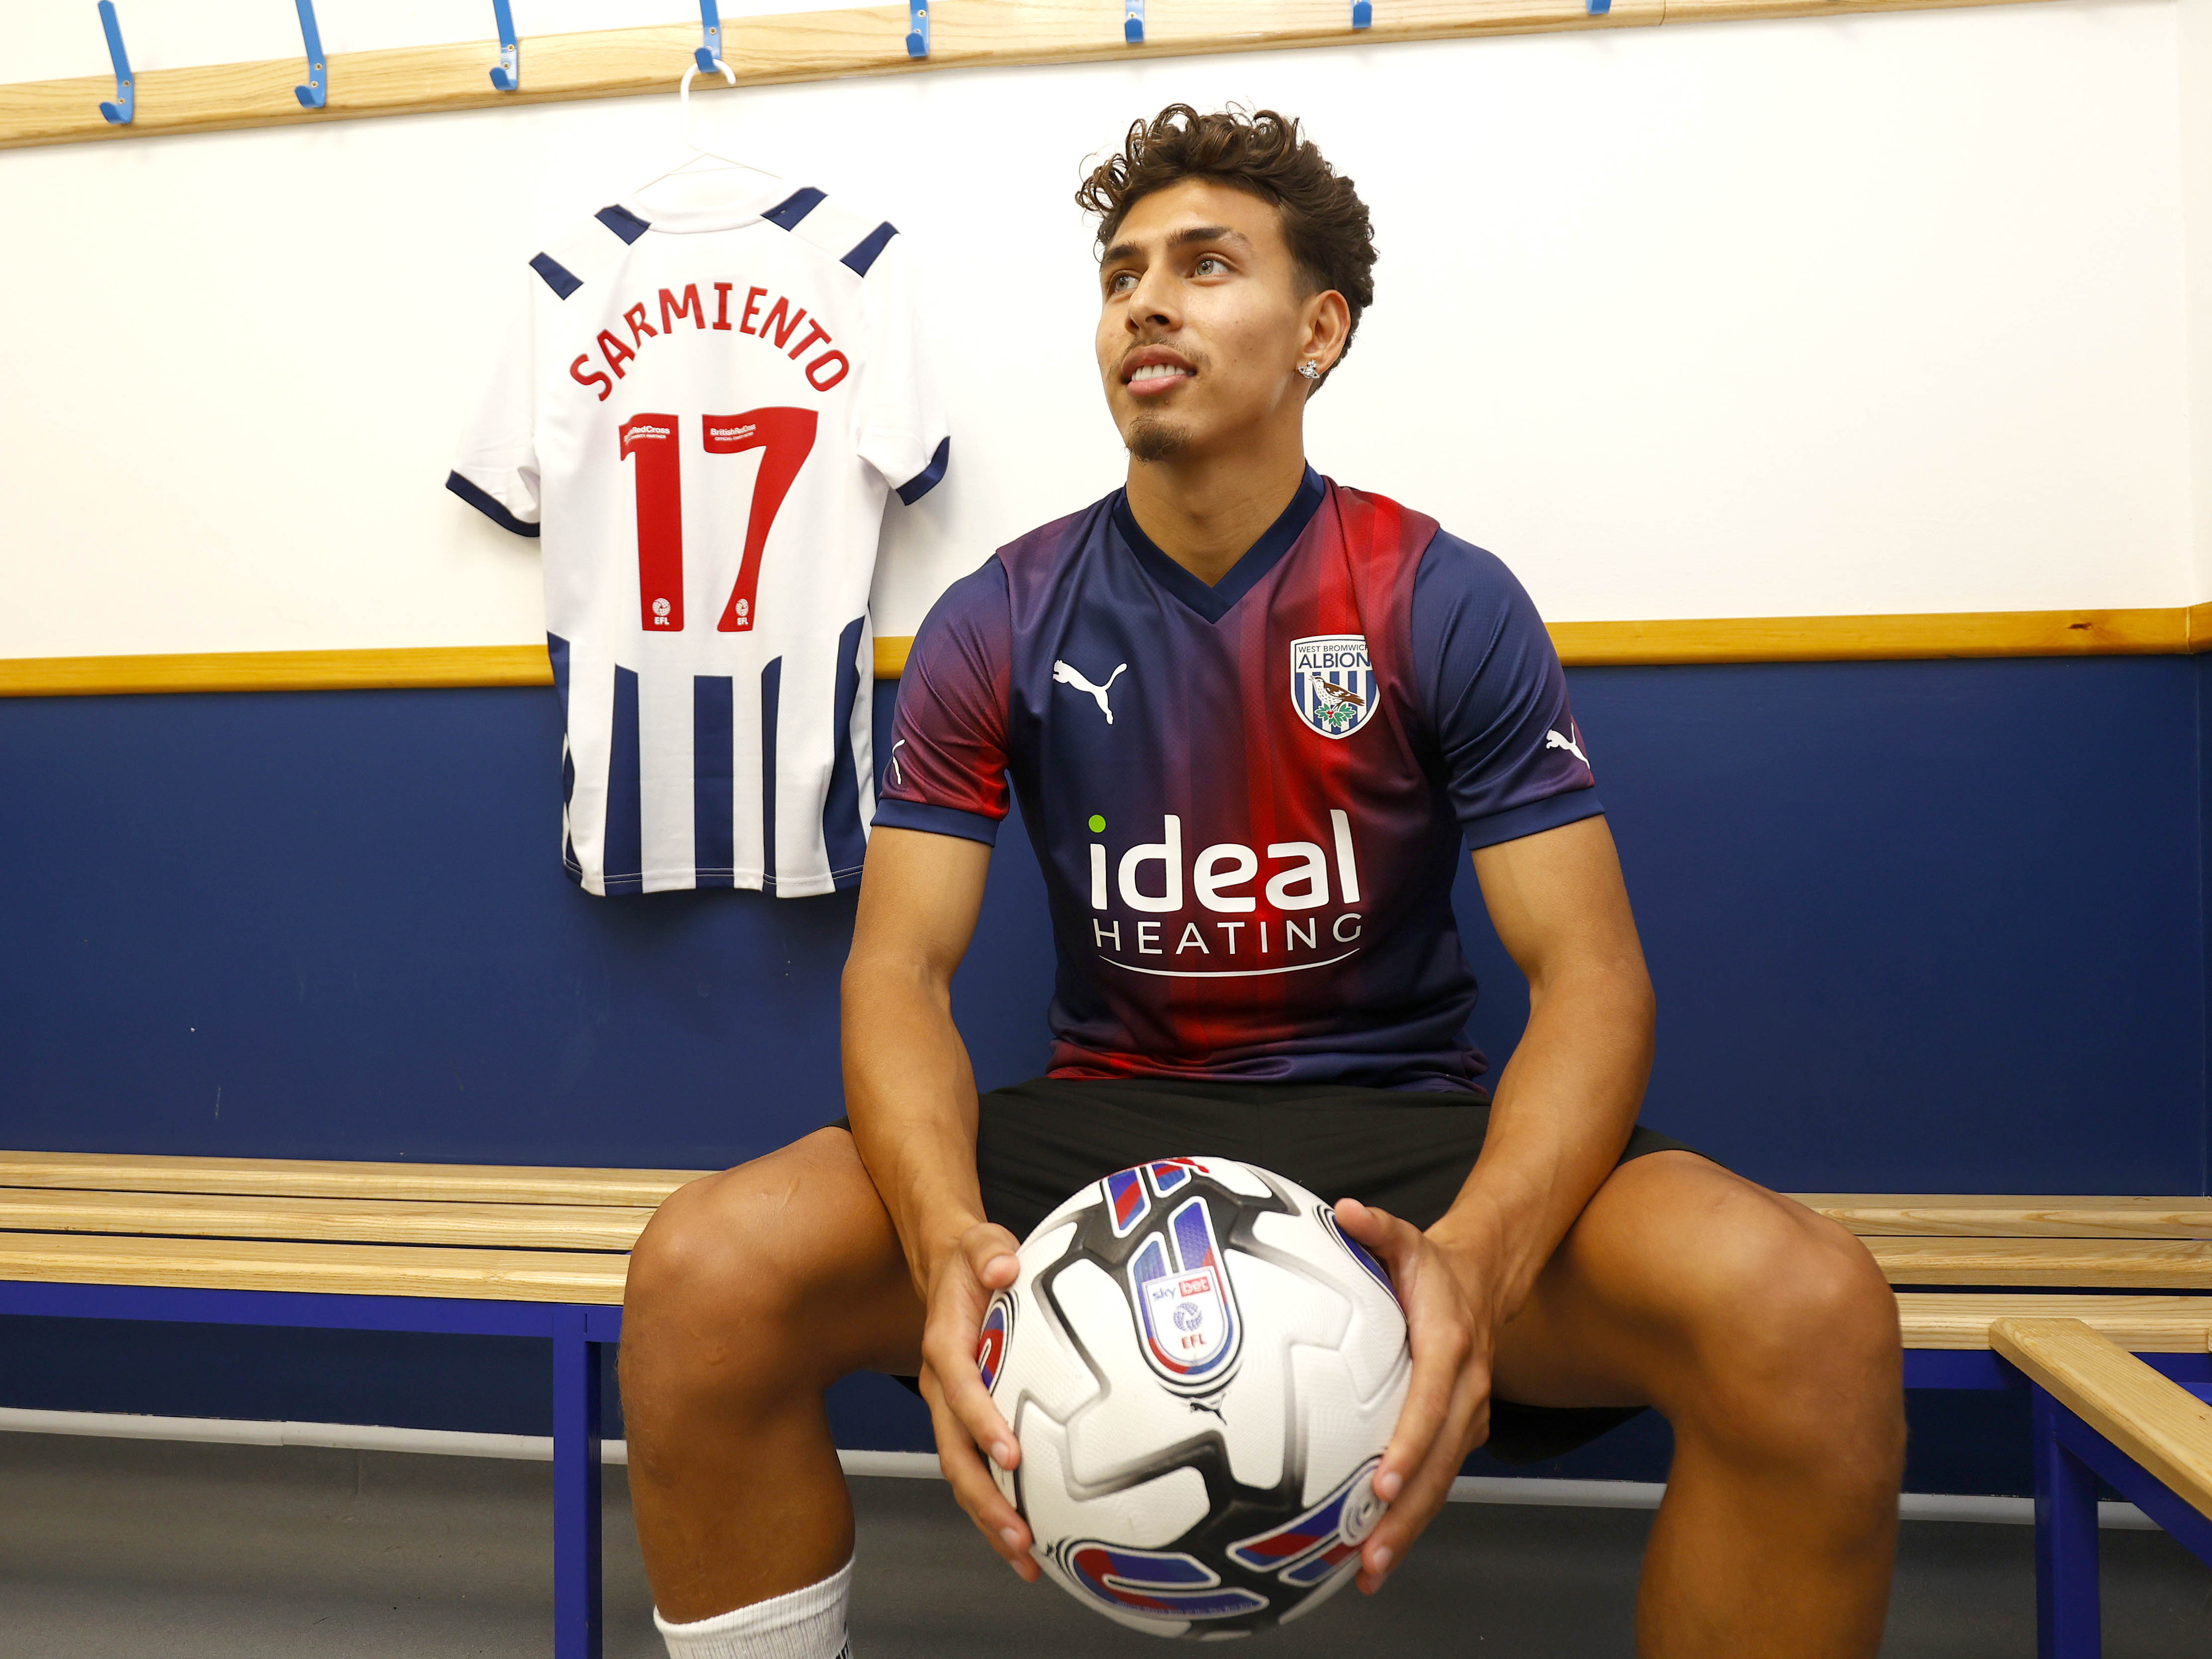 Jeremy Sarmiento | The first interview | West Bromwich Albion